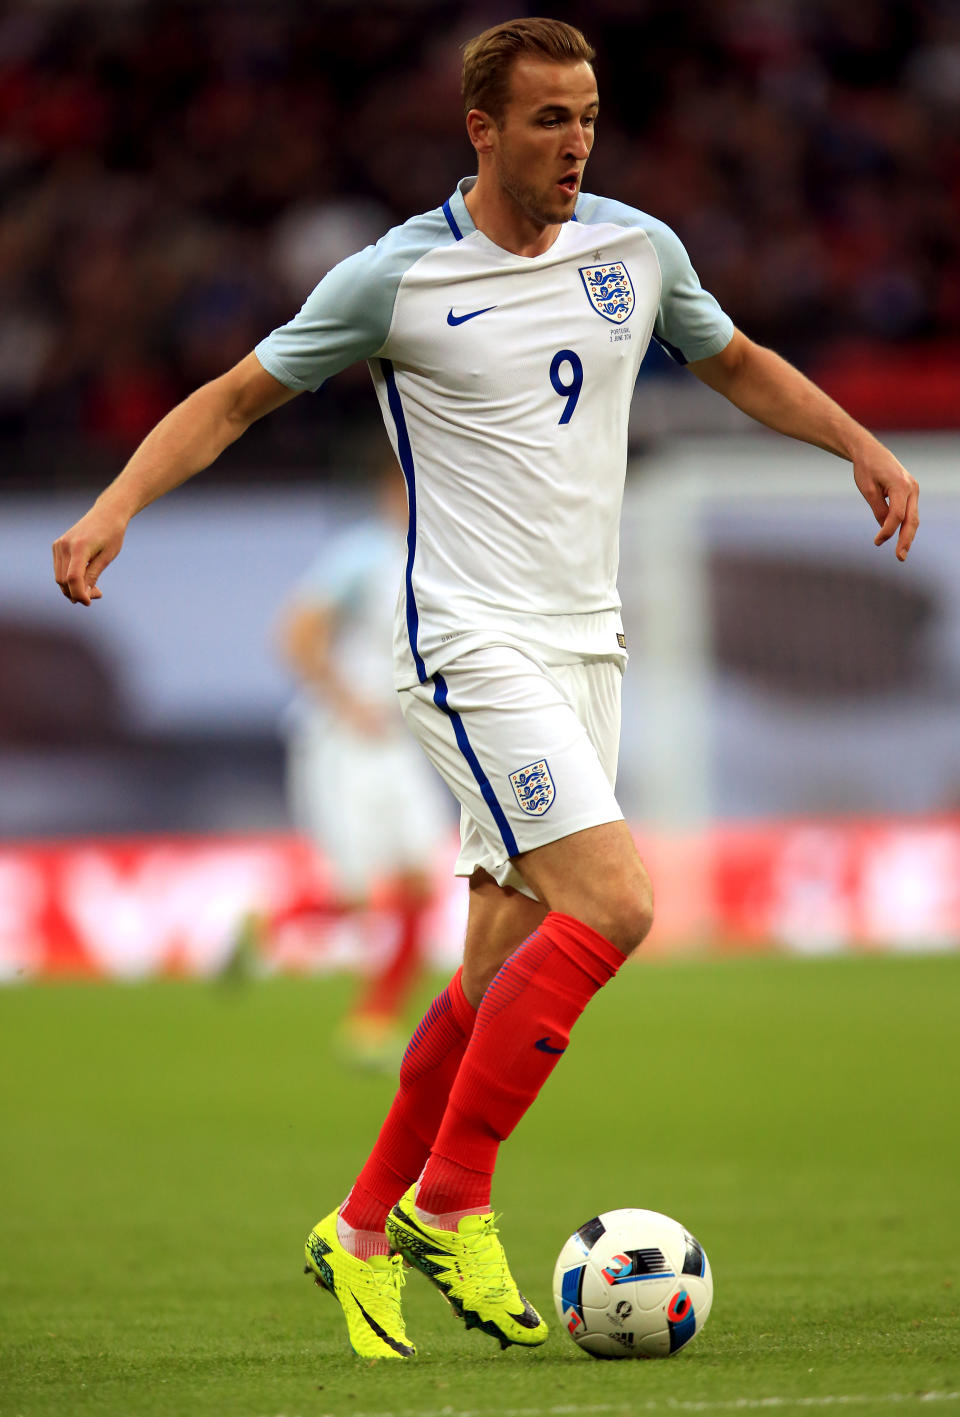 <p>Harry Kane<br> Age 24<br> Caps 23<br> Goals 12<br>As long as he is fit and in form, opponents will be wary of England. Nobody has scored more Premier League goals over the past three seasons than Kane and he positively relishes the prospect of shouldering the scoring burden for club and country. Unlikely to be on corner duty this time around.<br>Key stat: Despite missing out on a third straight Premier League Golden Boot, Kane reached 30 goals for the first time. </p>